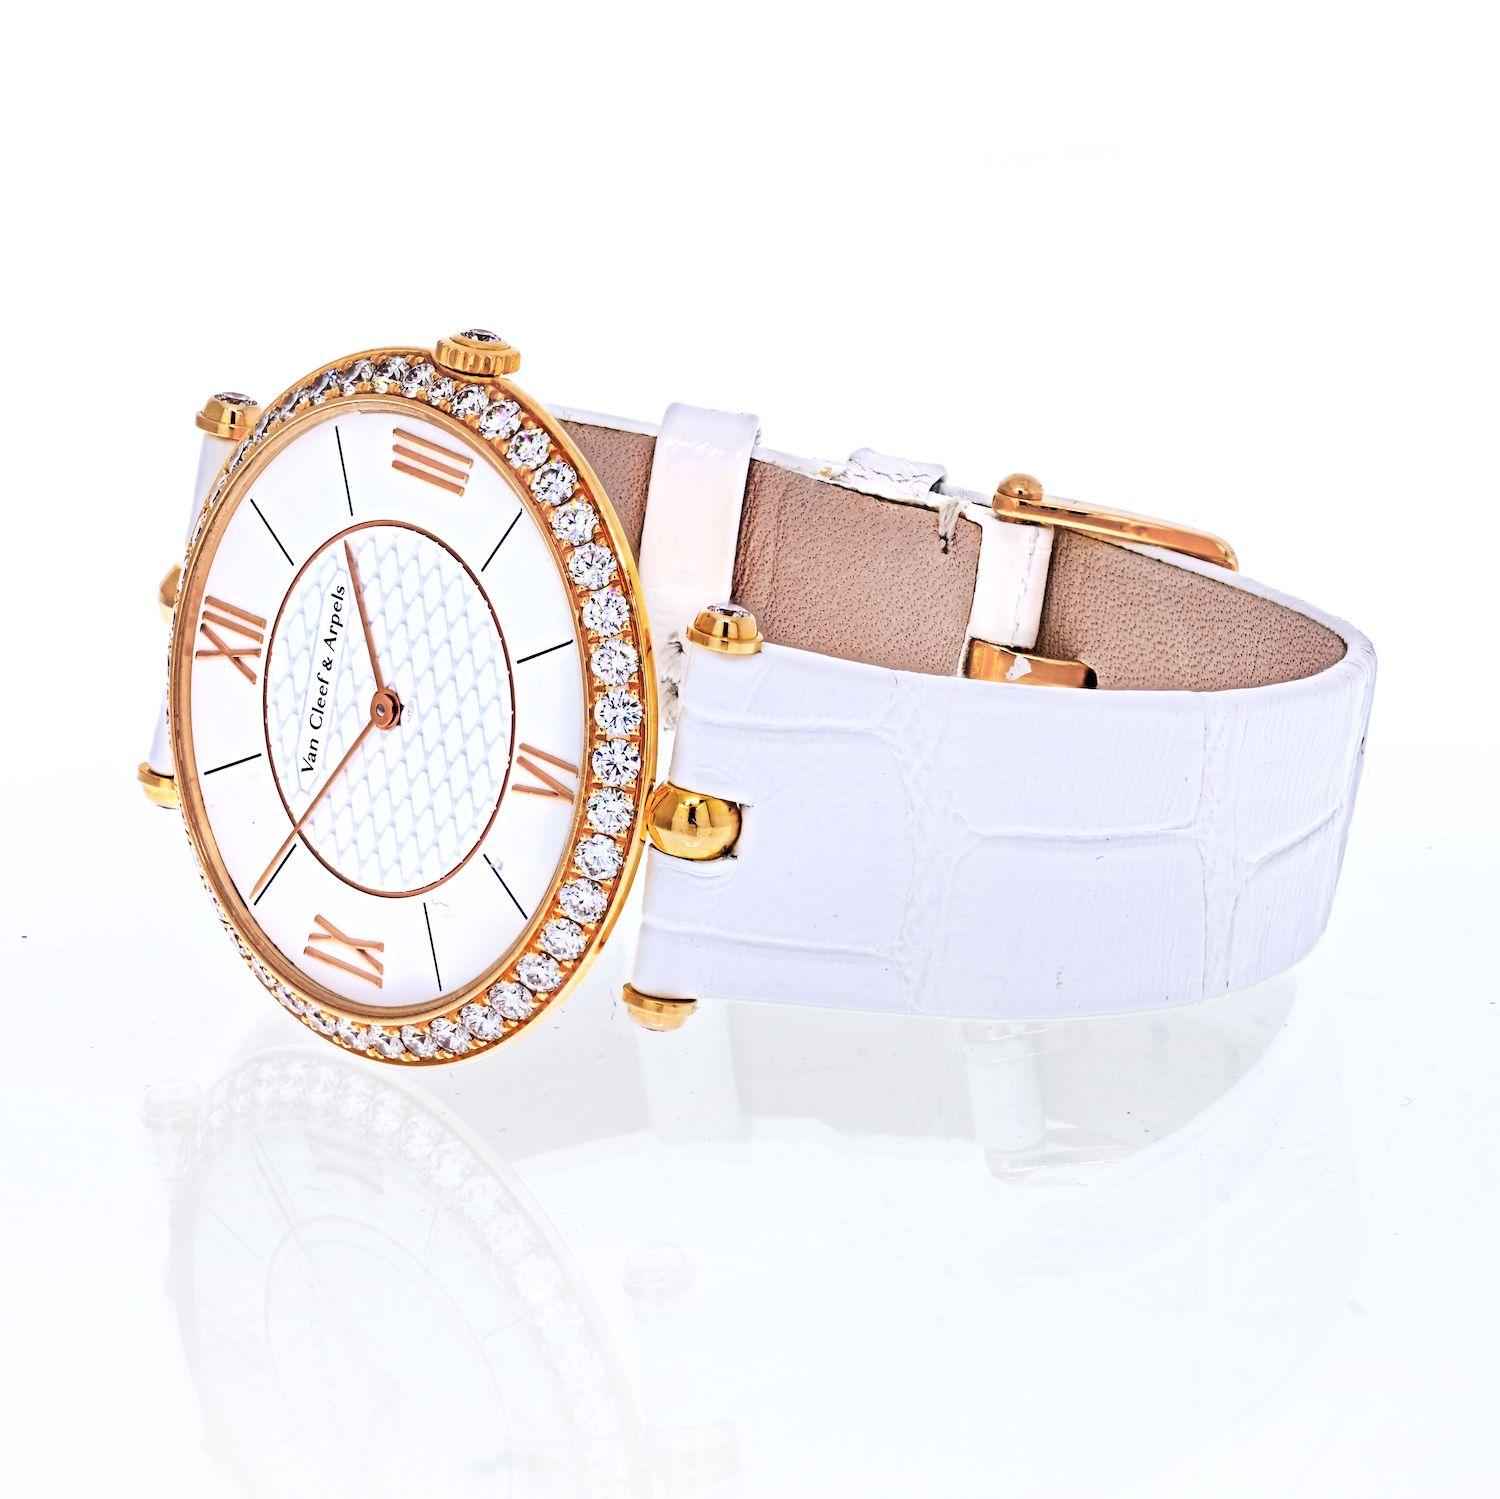 Pierre Arpels Manual in Rose Gold with Diamond Bezel
On White Alligator Leather Strap with White Lacquer Dial
Model #:	VCAR03GL00
Case:	Rose Gold with Diamond Bezel
Case Size:	38mm
Movement:	Manual
Dial:	White Lacquer
Bracelet:	White Alligator